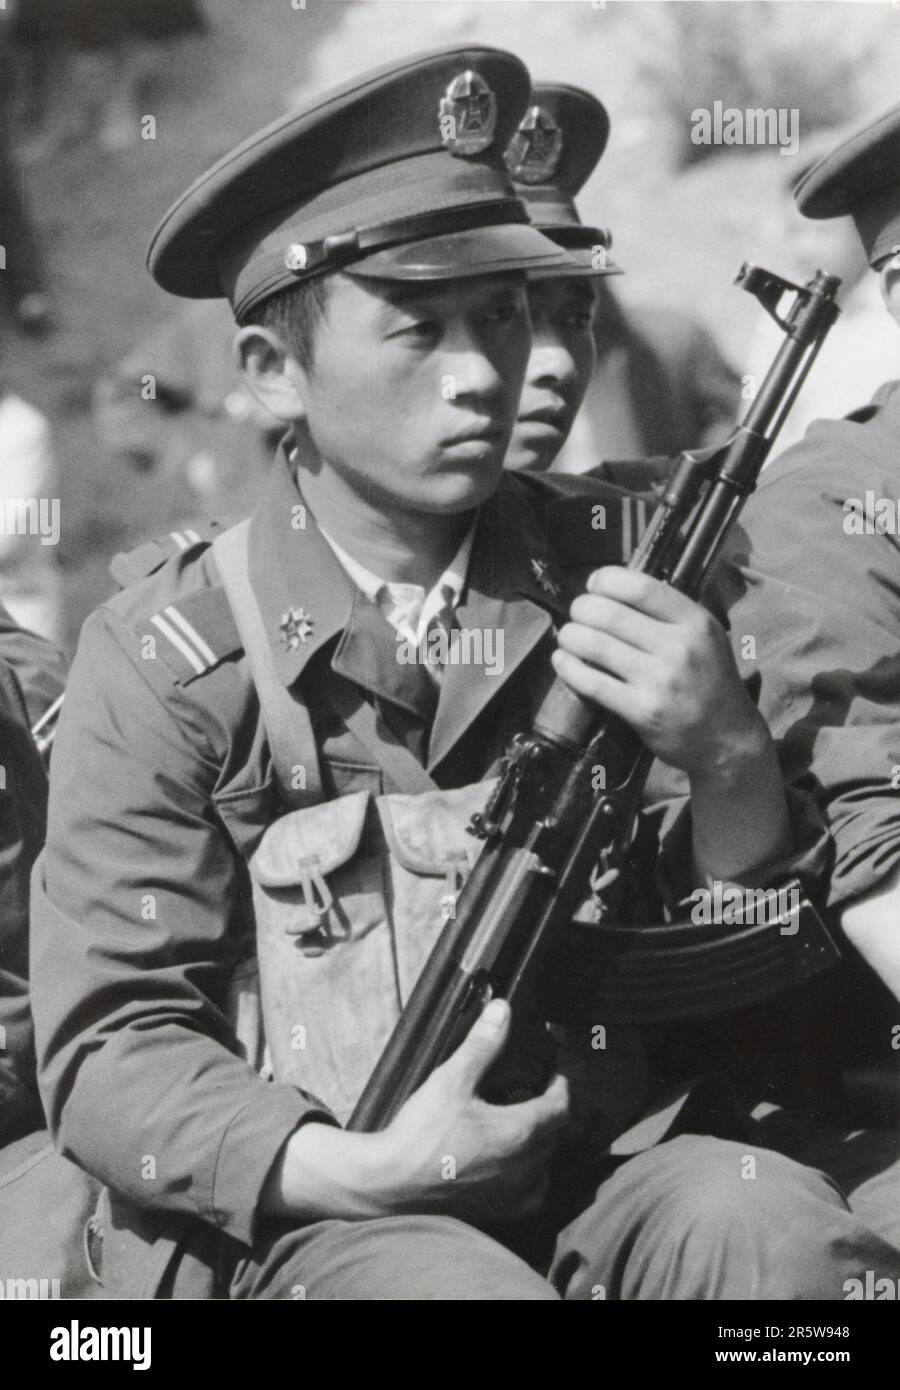 A Chinese Soldier from the People Liberation Army grips his AK-47 machine gun while sitting on the back of a troop-carrying truck on the outskirts of Beijing on May 20, 1989. This was the first appearance of lethal weapons in the government's crackdown on pro-democracy protesters in Tiananmen Square. The army began to open fire on protesters in the early morning hours of June 4, 1989. Stock Photo